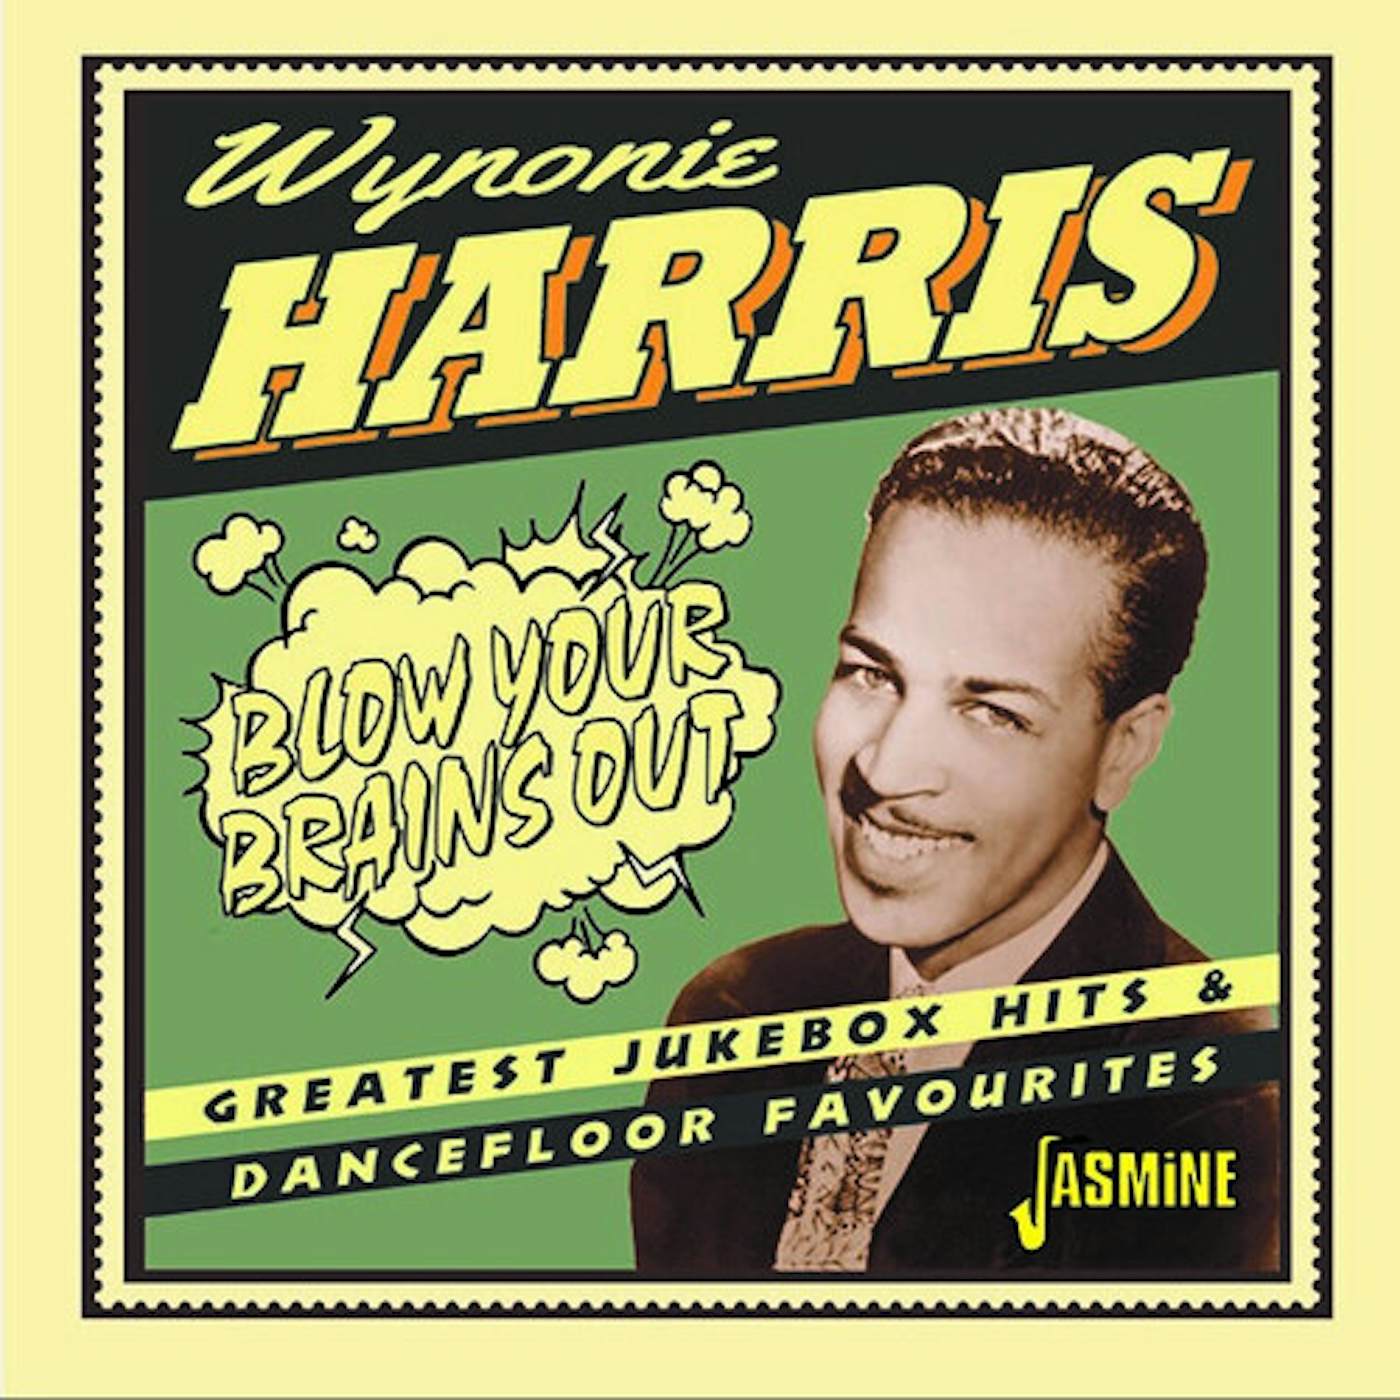 Wynonie Harris BLOW YOUR BRAINS OUT: GREATEST JUKEBOX HITS CD